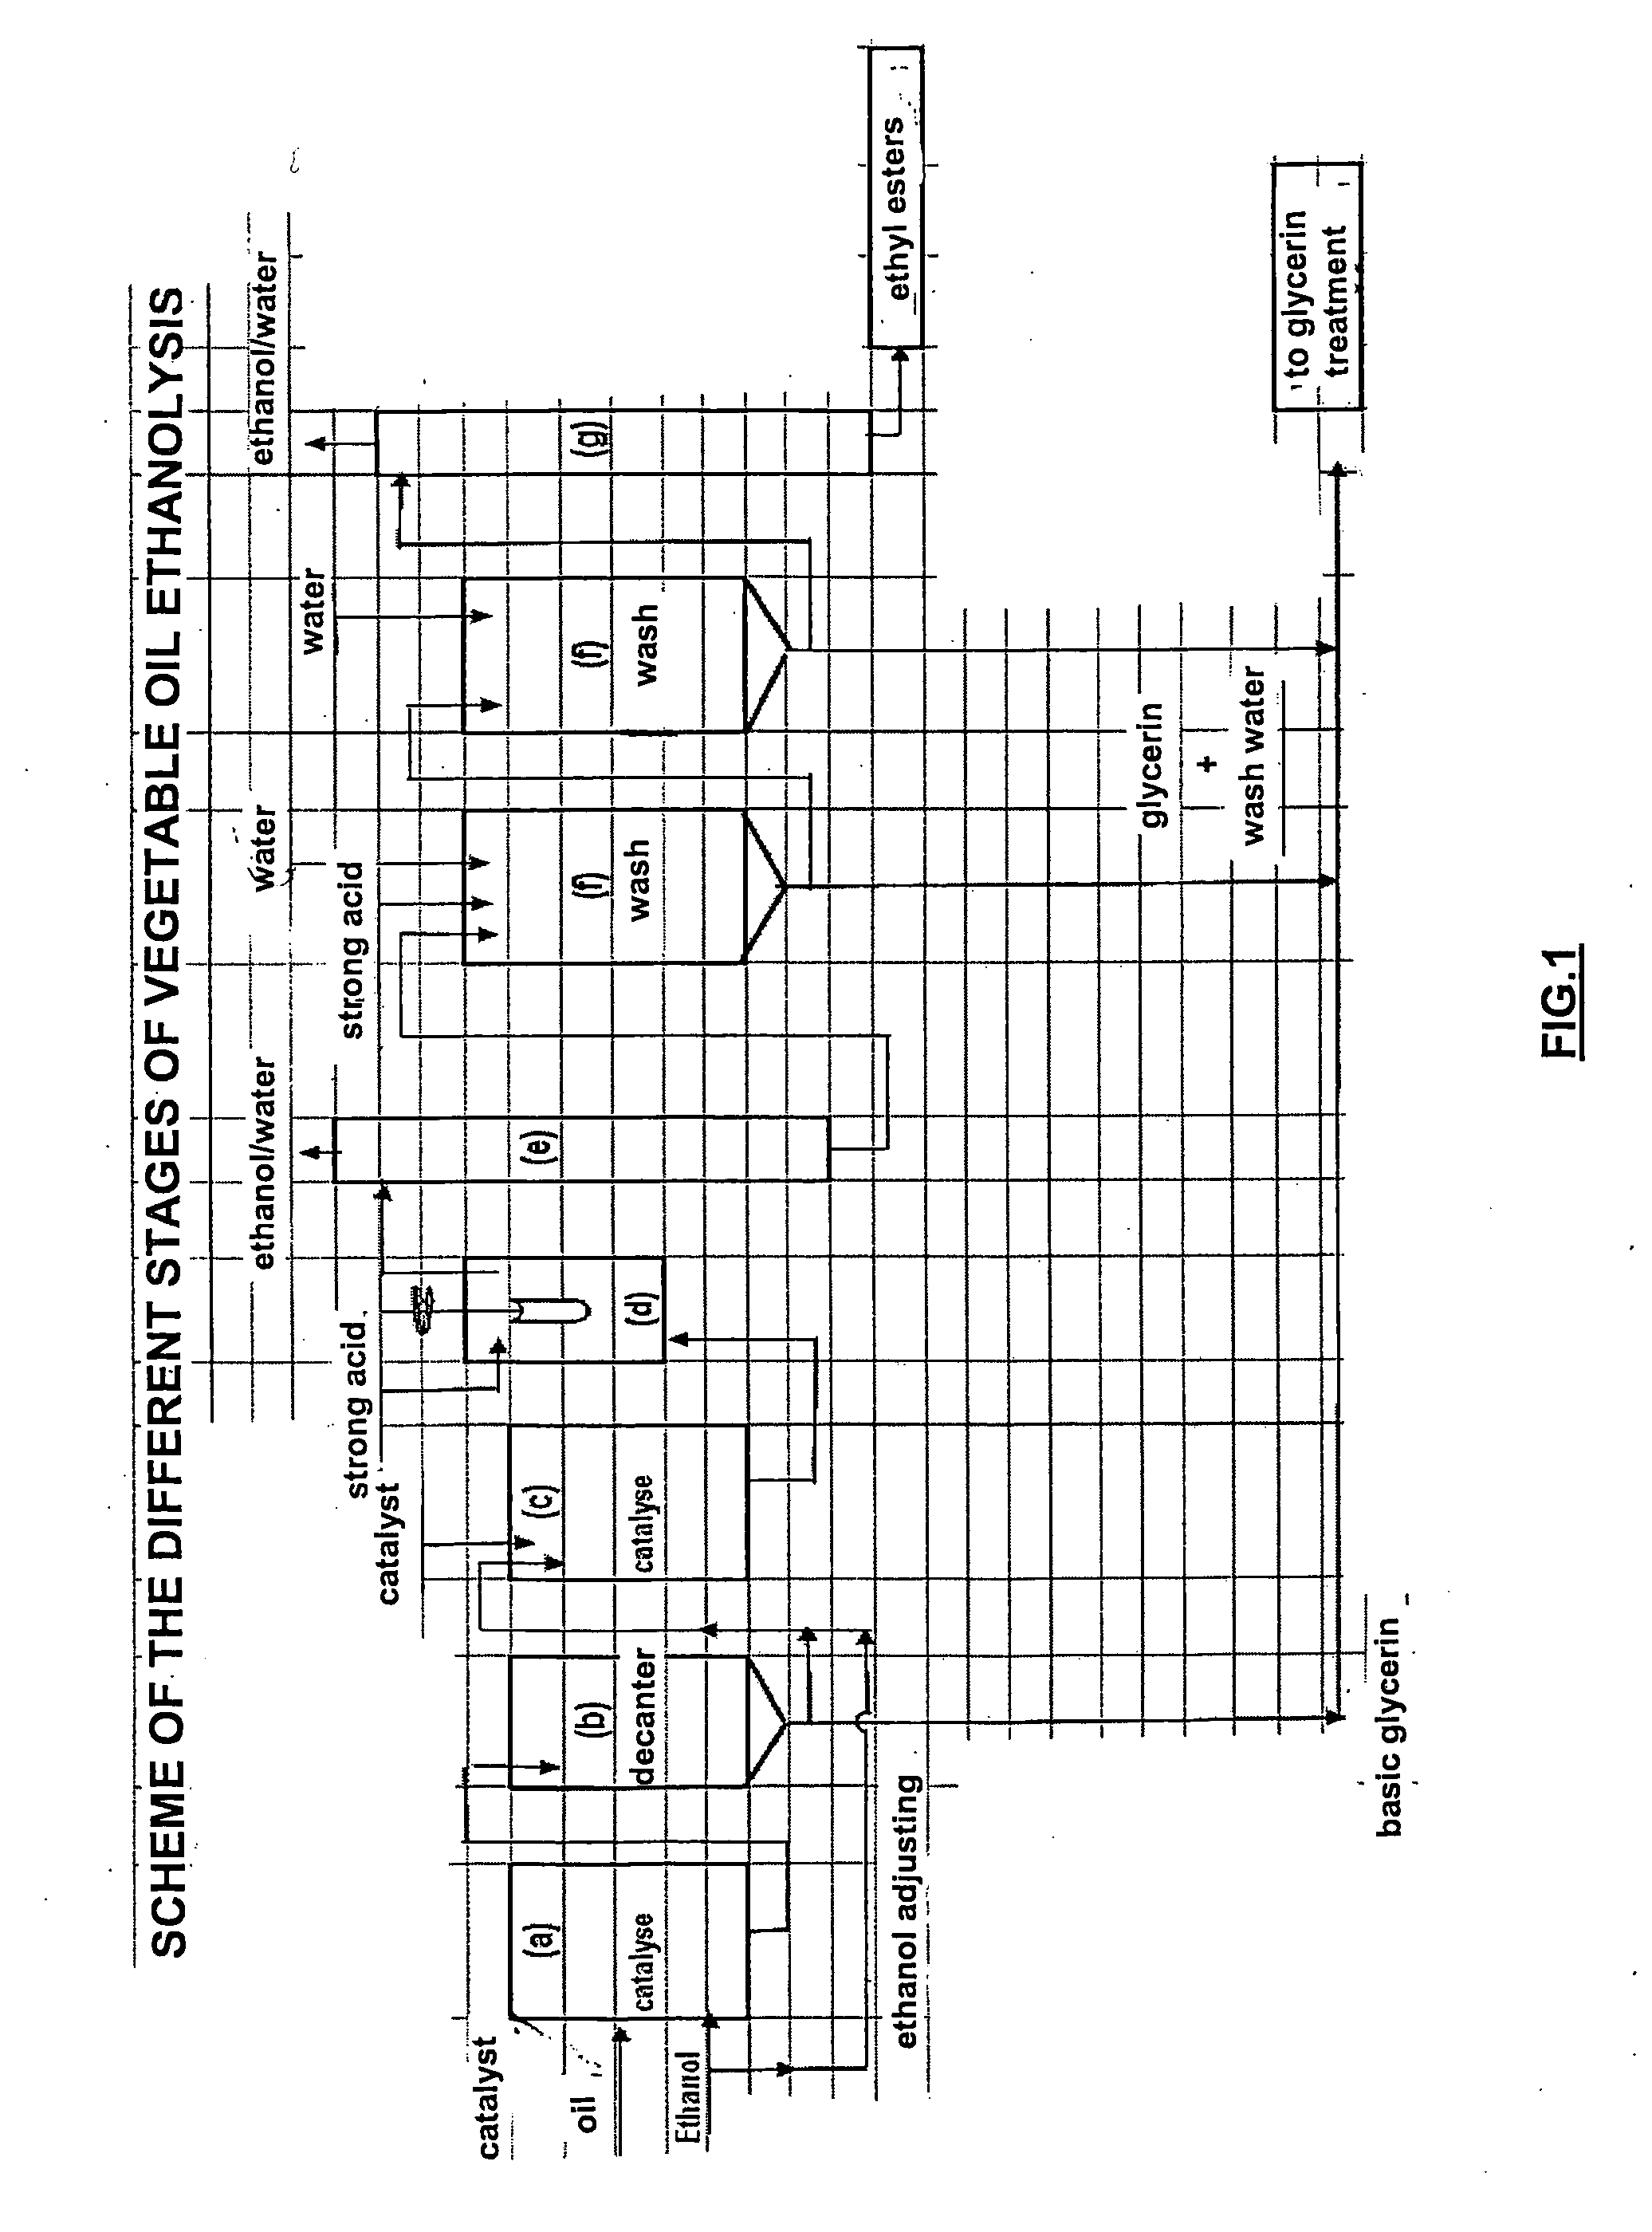 Method for manufacturing ethyl esters from fatty substances of natural origin